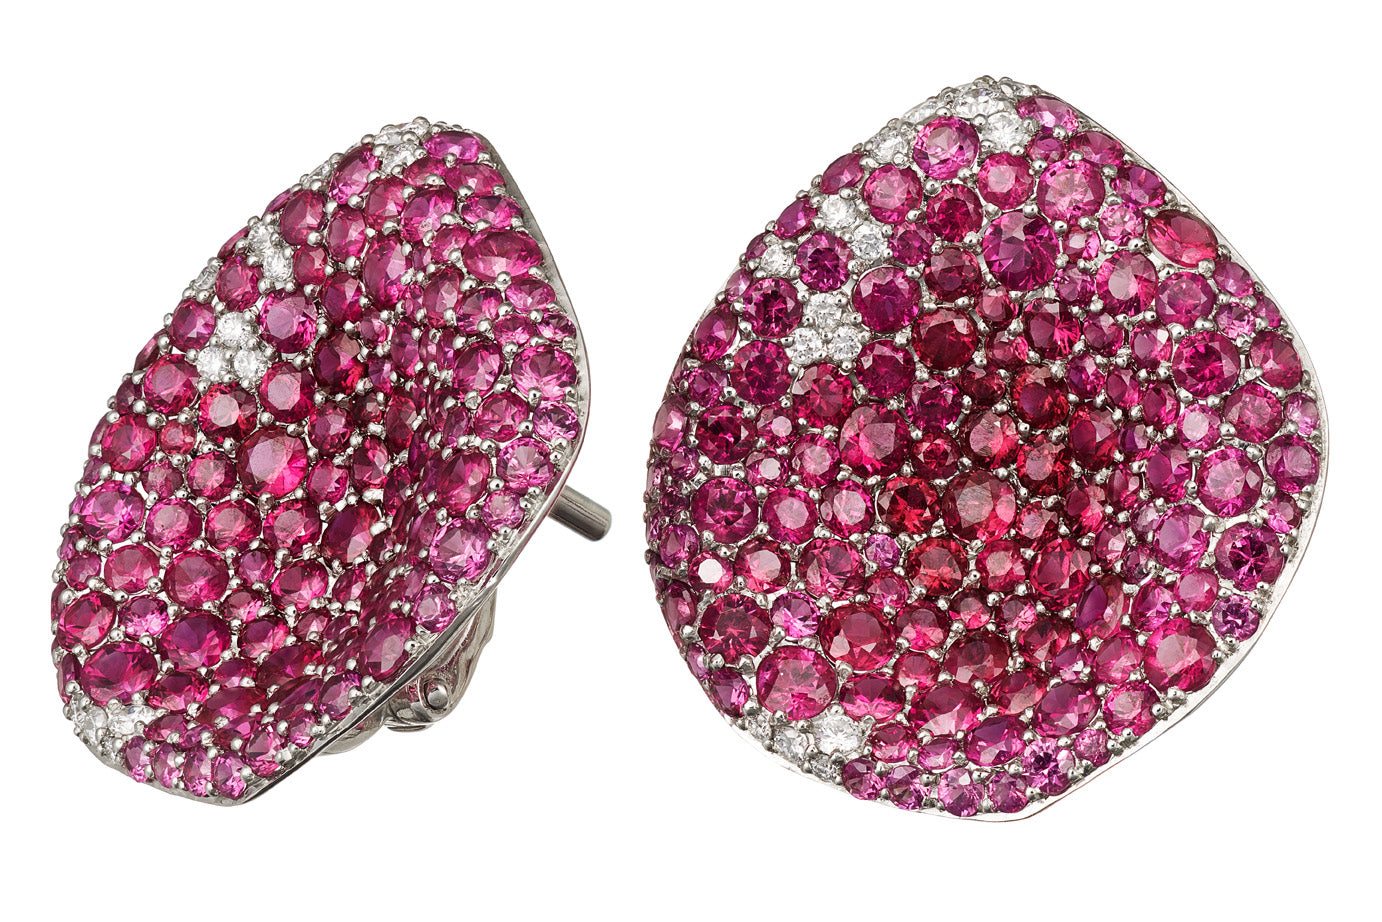 Earrings "Mariandl Rose" White Gold with Rubies and White Diamonds